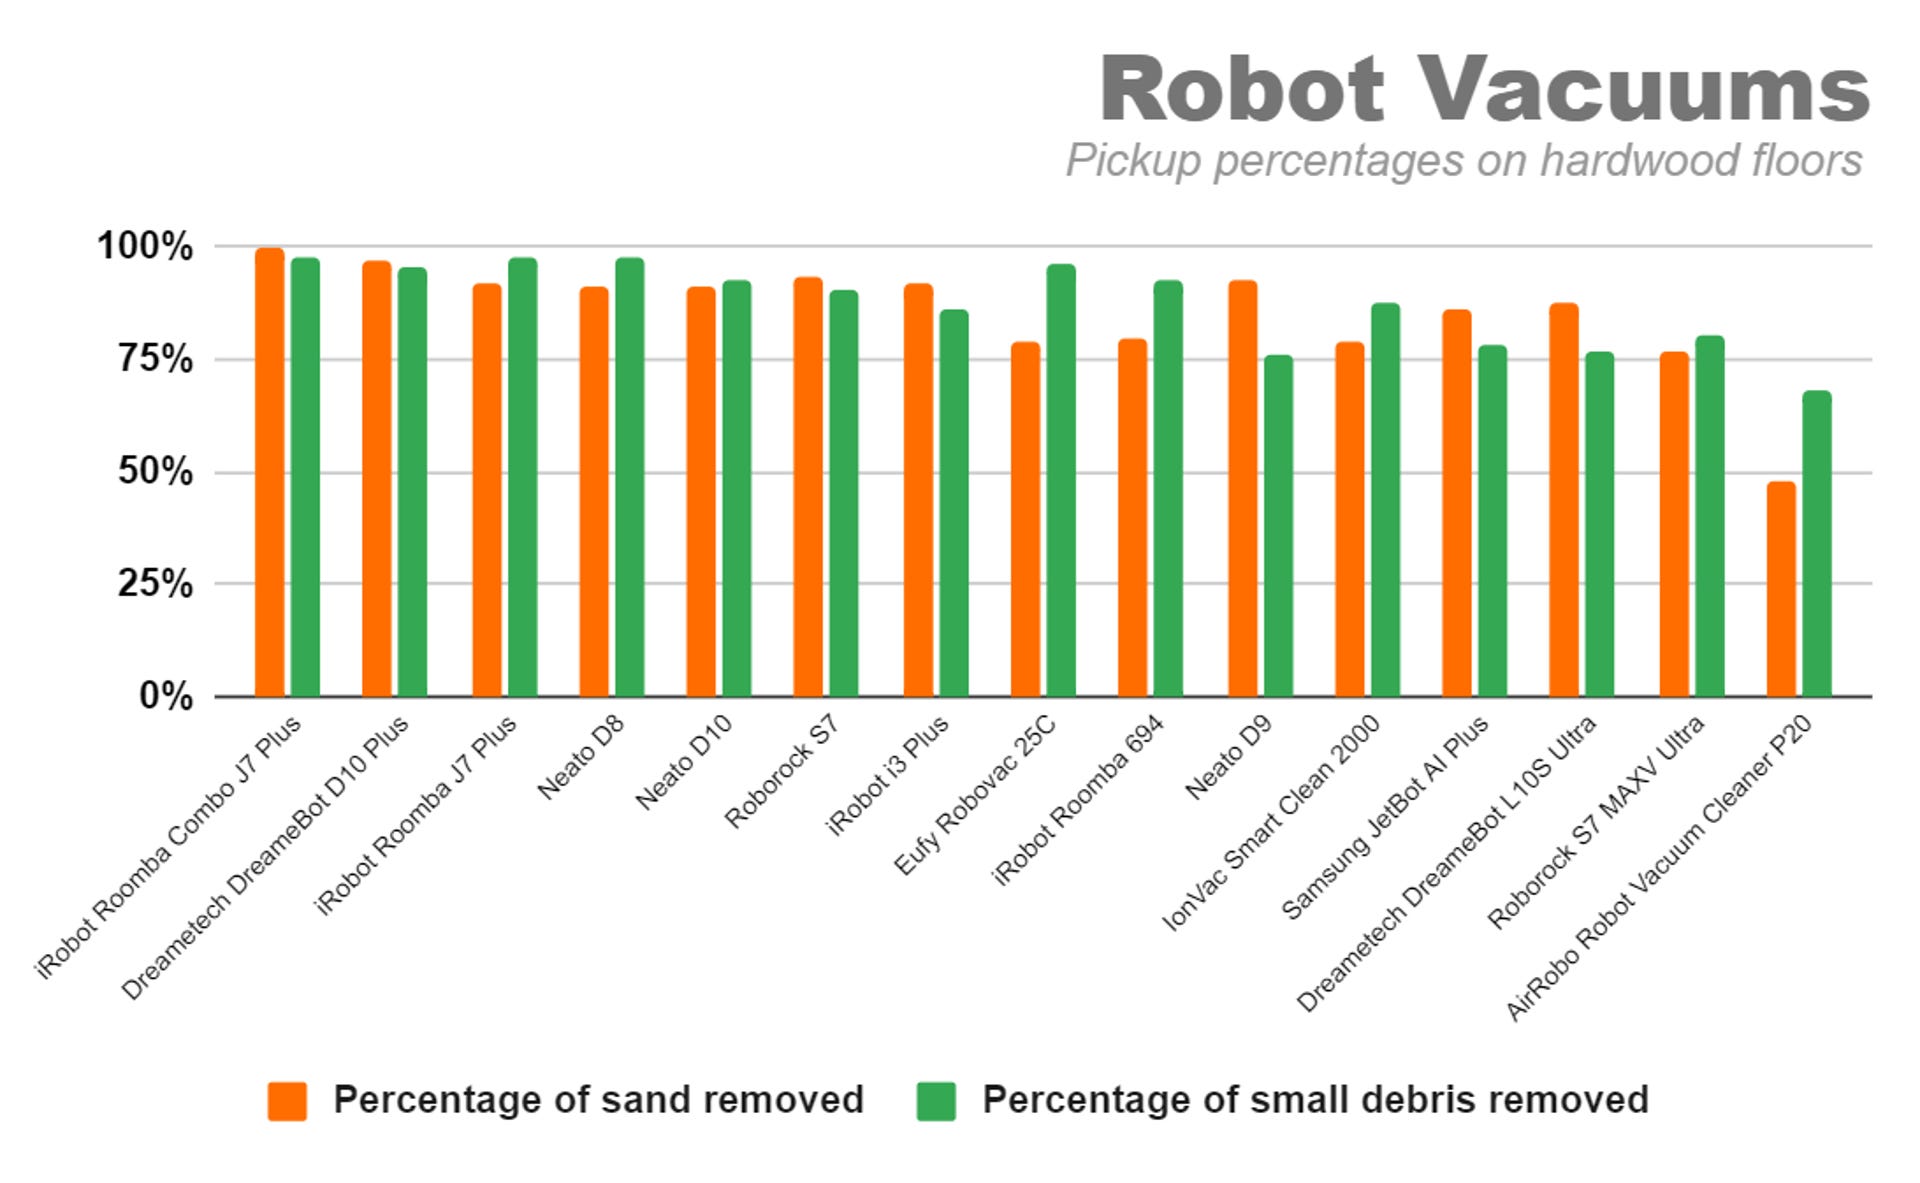 A bar graph shows the CNET-tested pickup percentages for fifteen robot vacuums on hardwood floors. The iRobot Roomba Combo J7 Plus leads all of them, picking up an average of 98% of small debris and 100% of sand-sized particles.